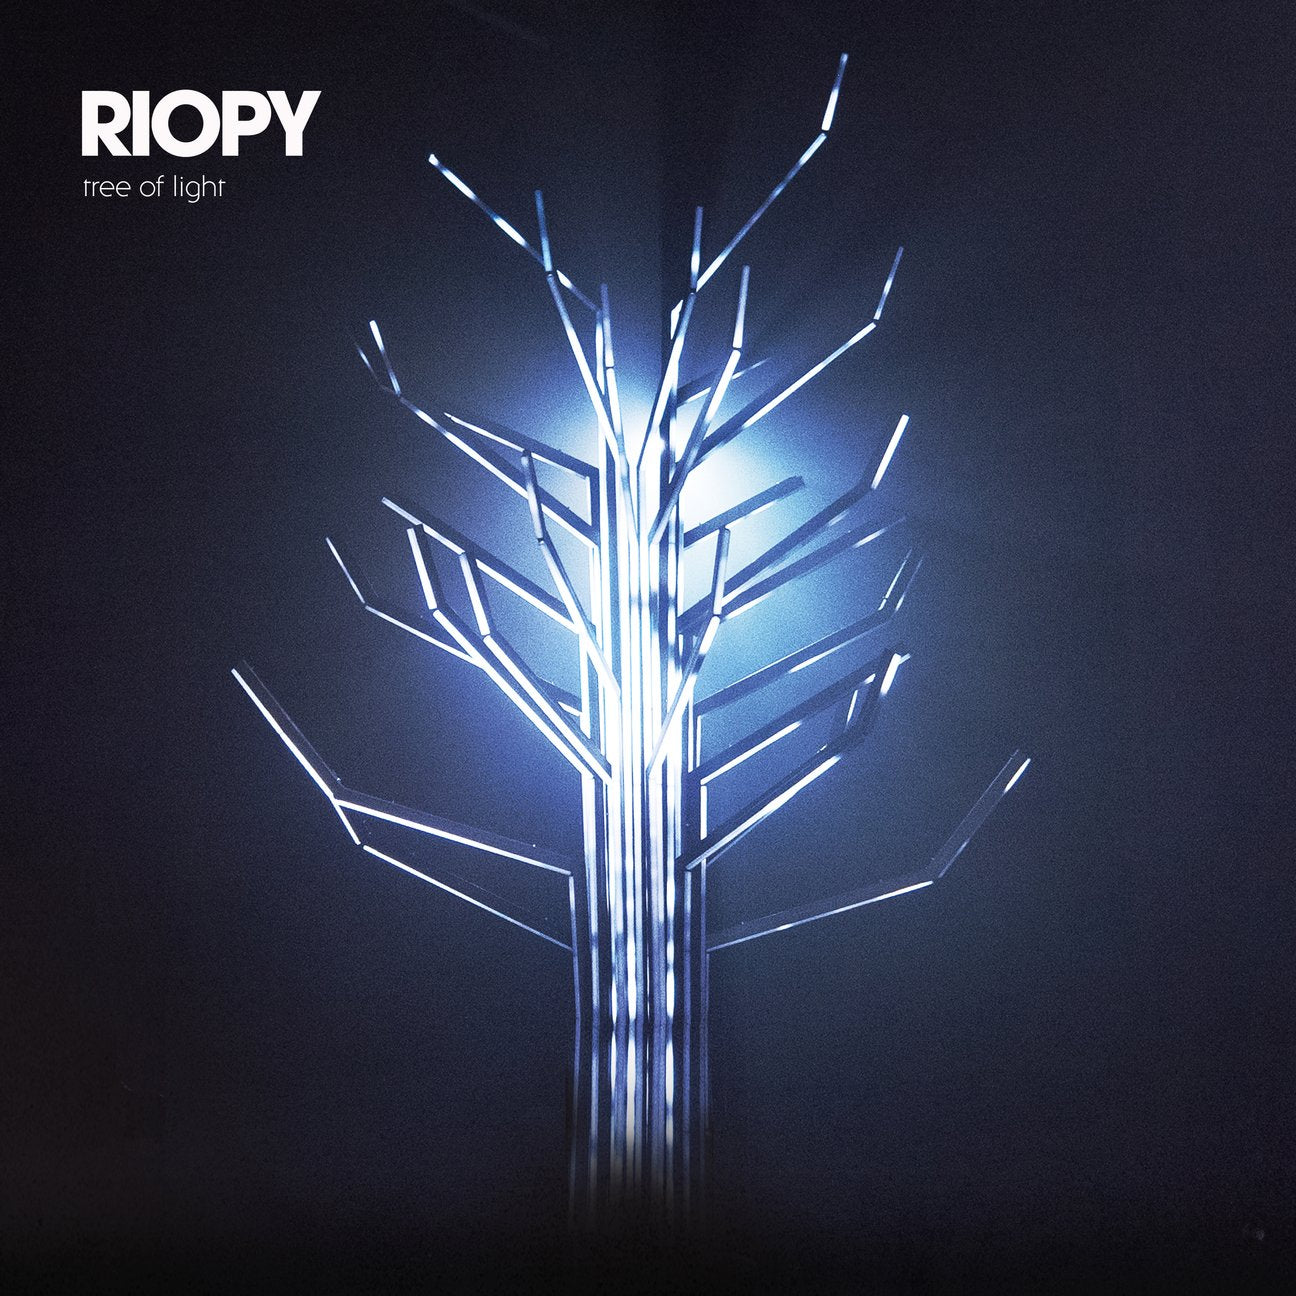 Theme Music for a Dream sheet music from RIOPY's Tree of Light album